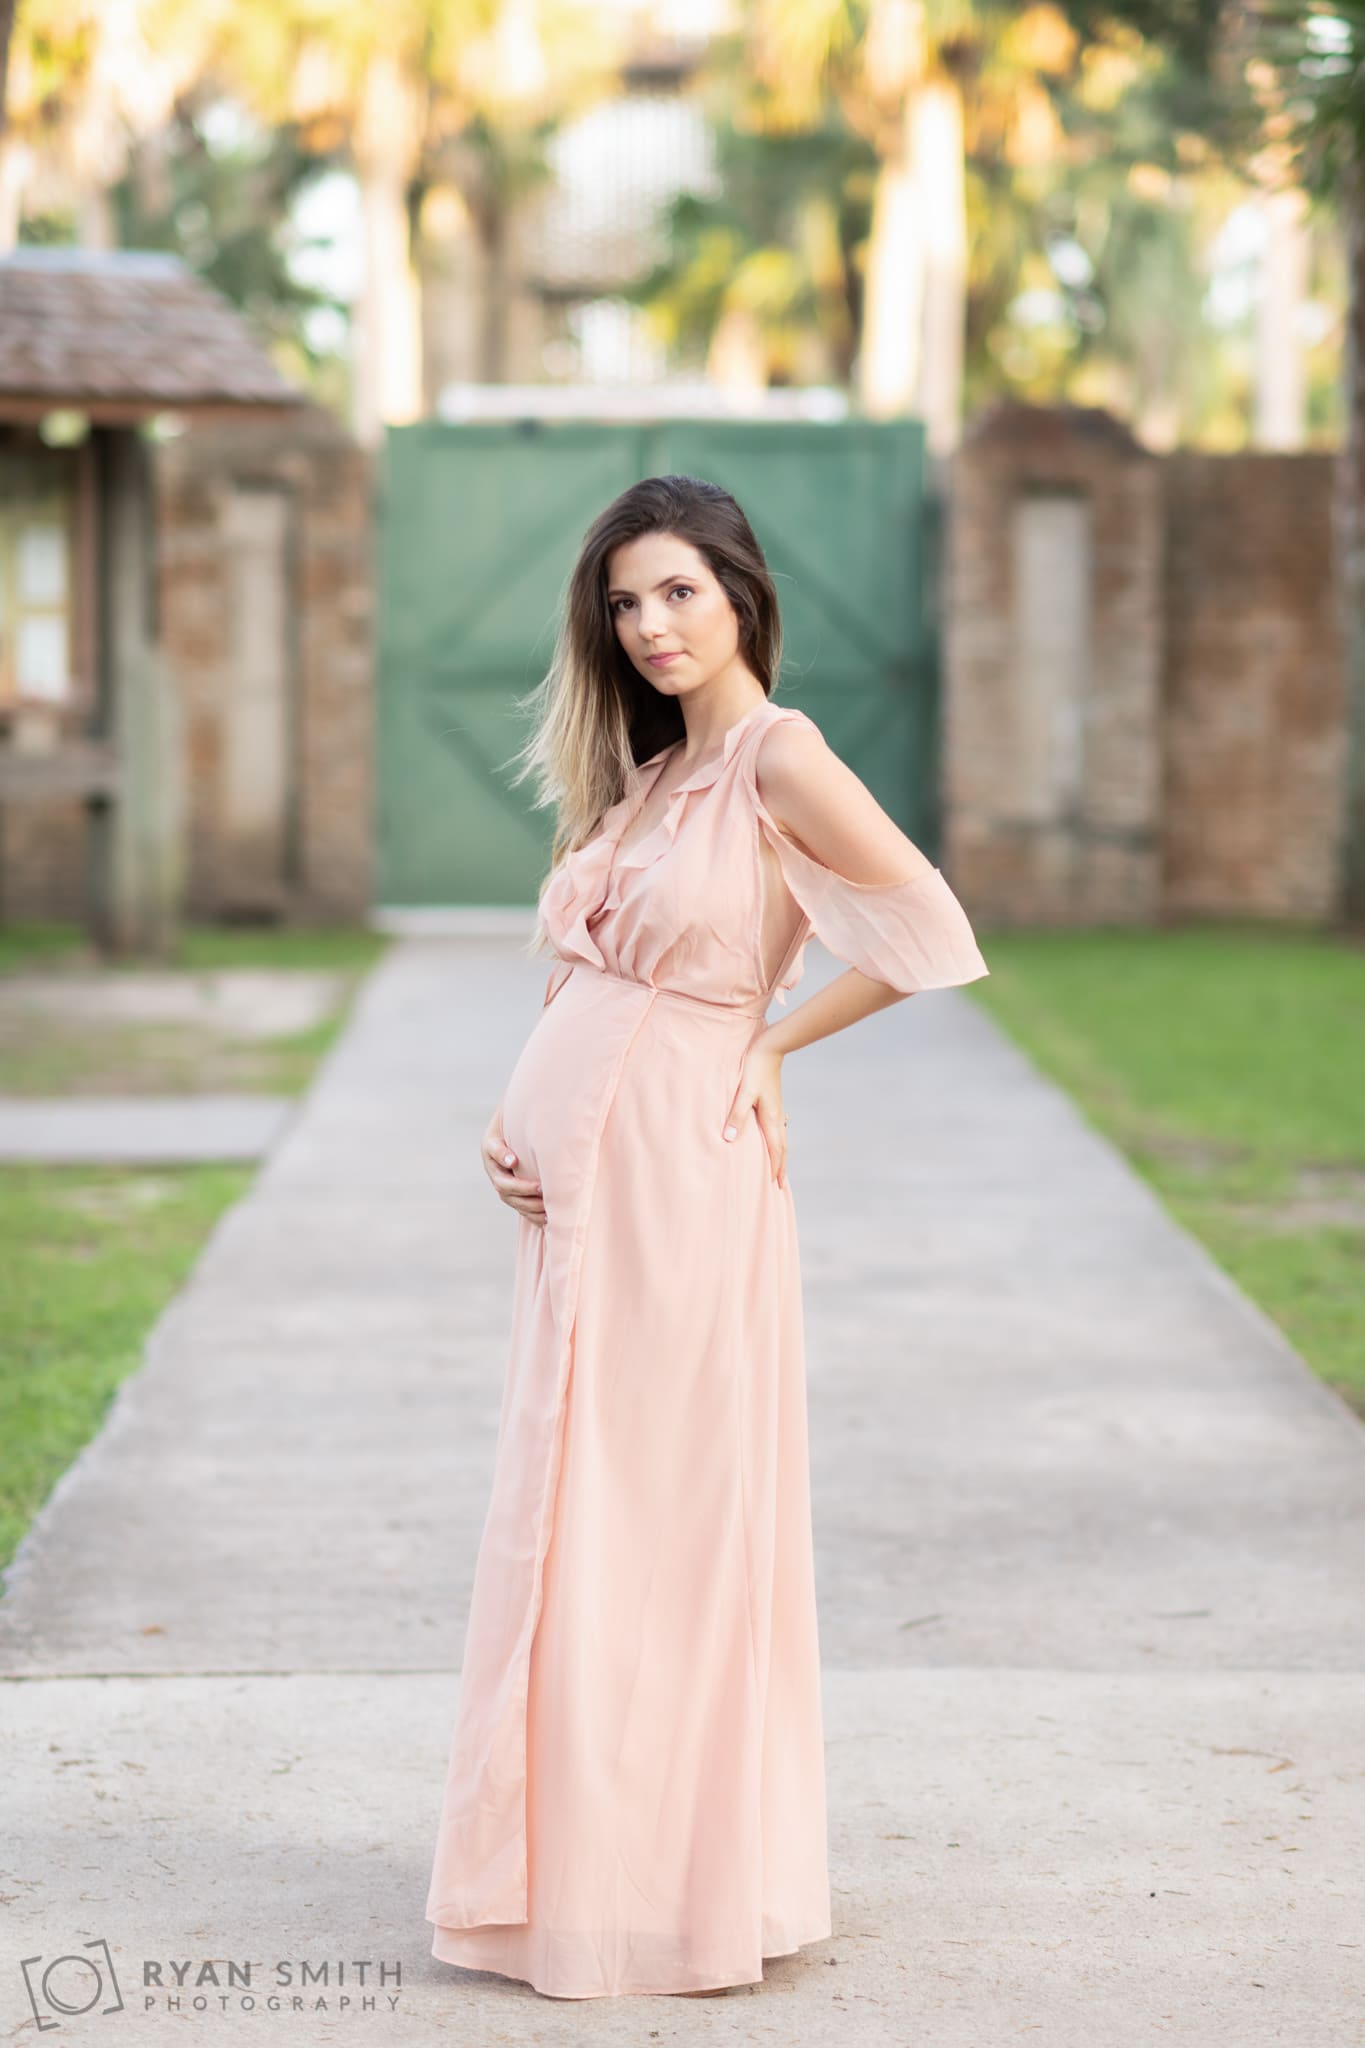 Maternity portrait with mother touching her belly  - Atalaya Castle